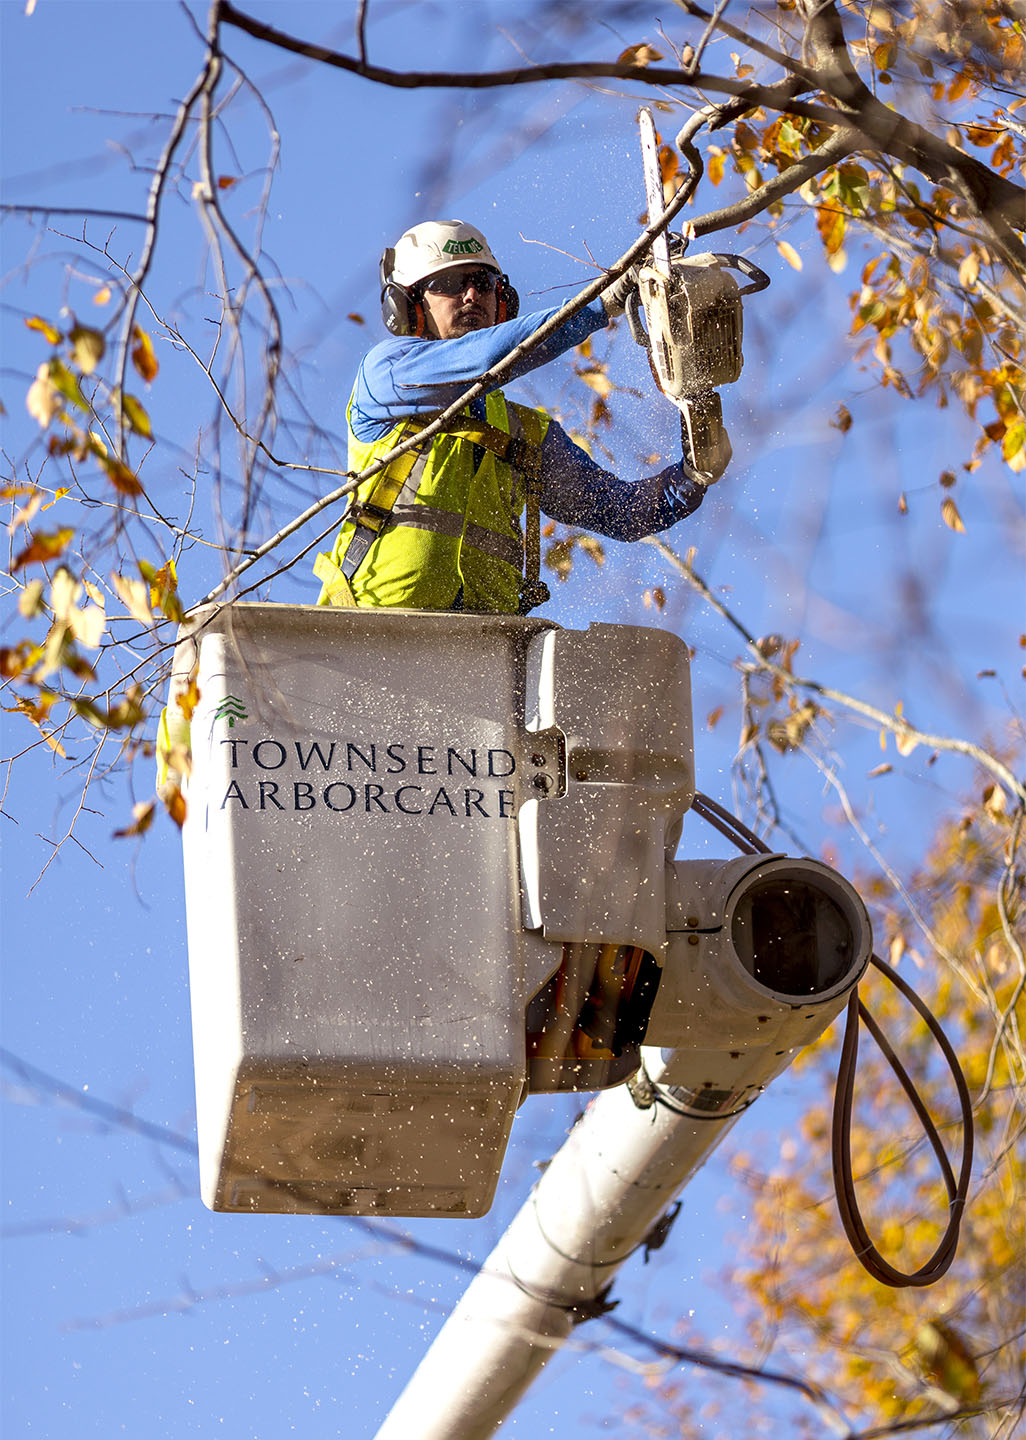 Townsend Arborcare tree trimming specialists have the skills and experience to do proper tree pruning to keep them healthy.